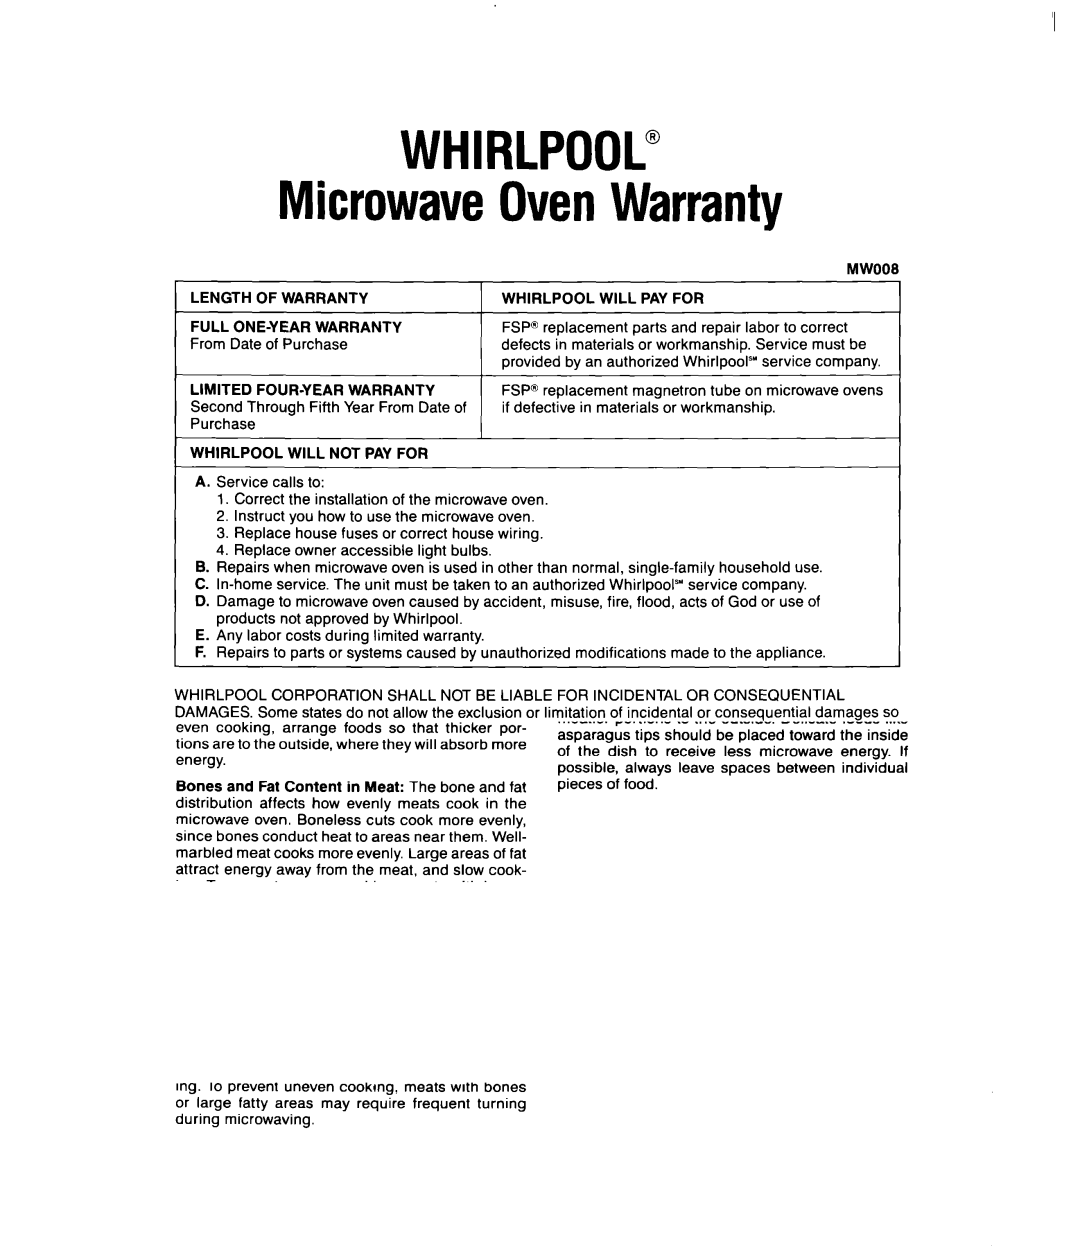 Whirlpool MSI040XY MicrowaveOvenWarranty, From Date of Purchase, Second Through Fifth Year From Date Purchase MWOOEi 